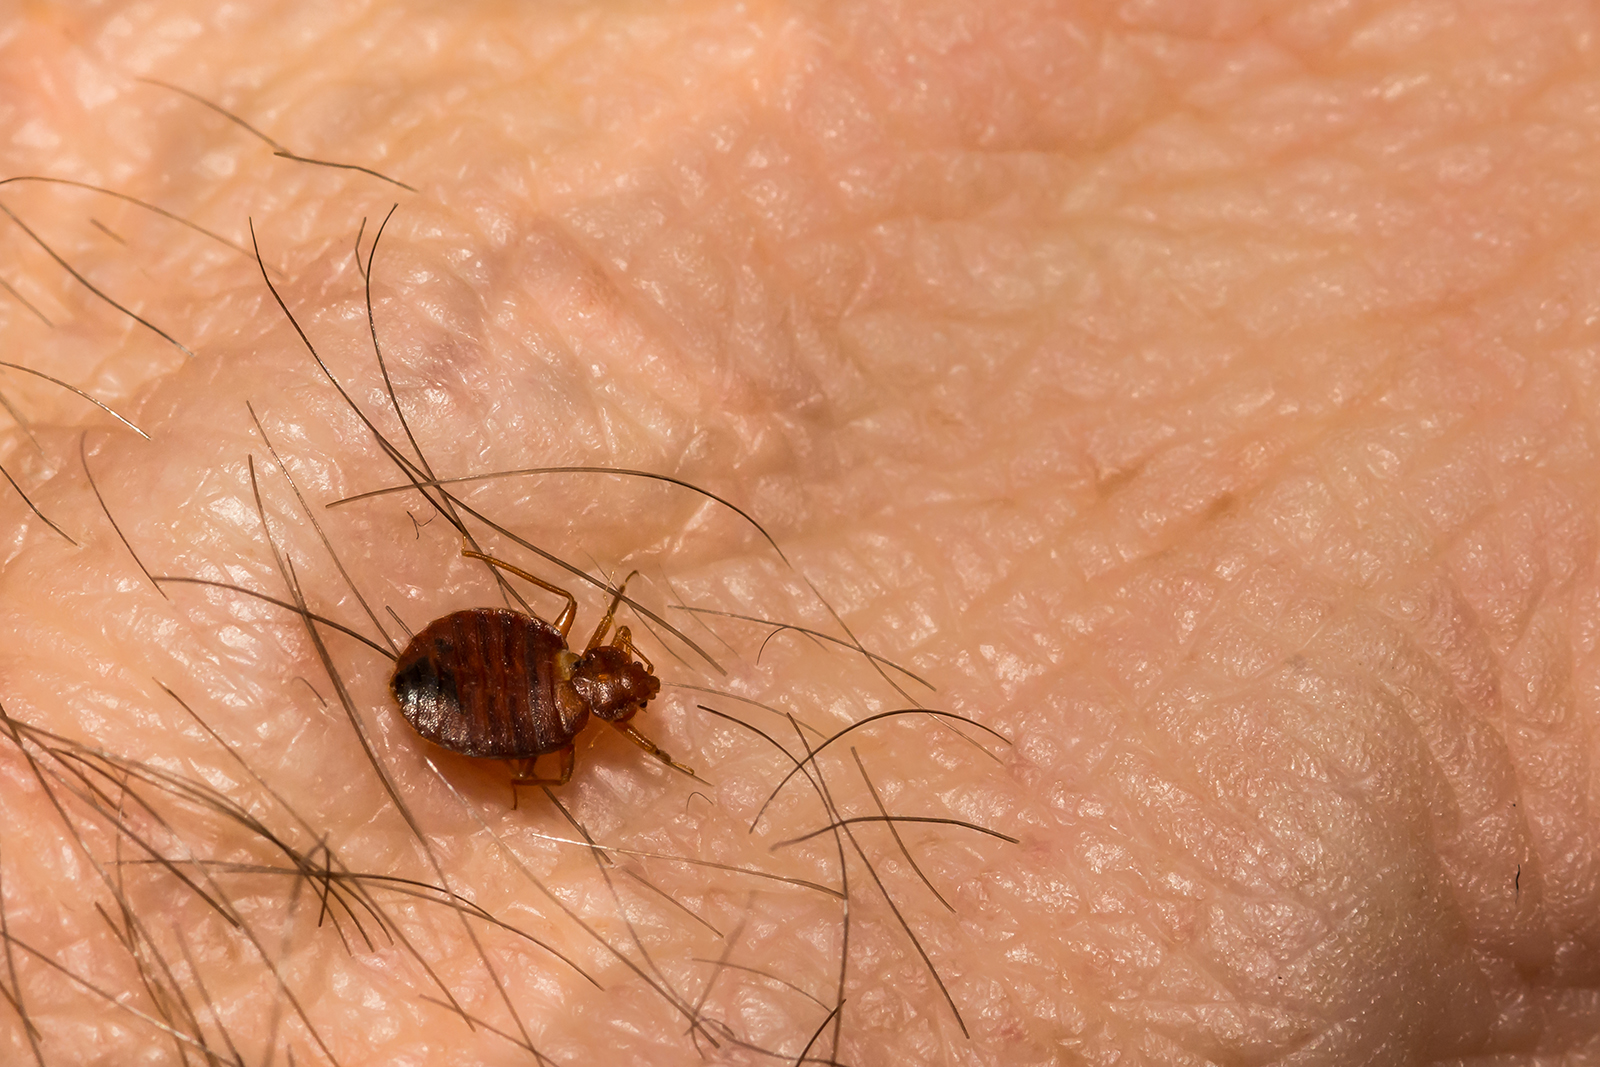 Can you feel bed bugs crawling?